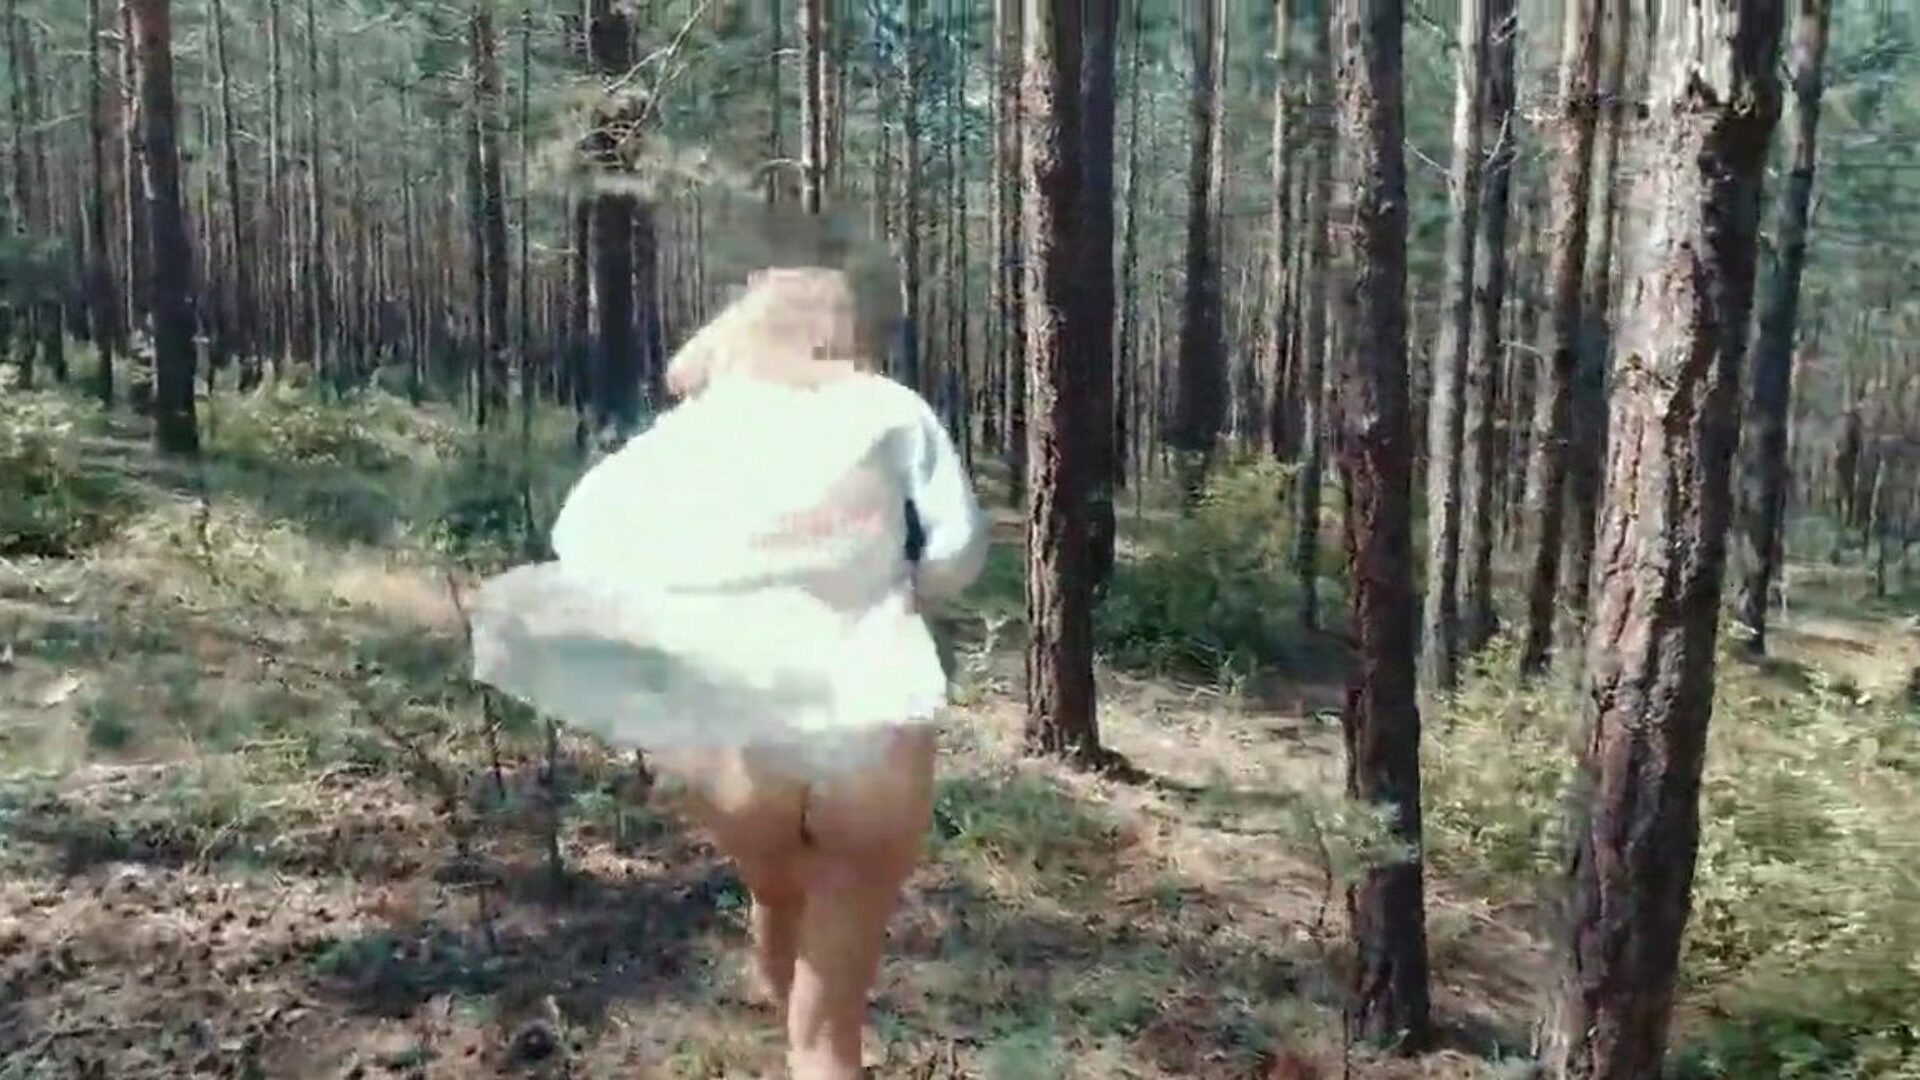 Tiffany fucks in the public forest and ambles bare I walked throughout the woods in search of mushrooms, I didn't discover any mushrooms, but I found intercourse